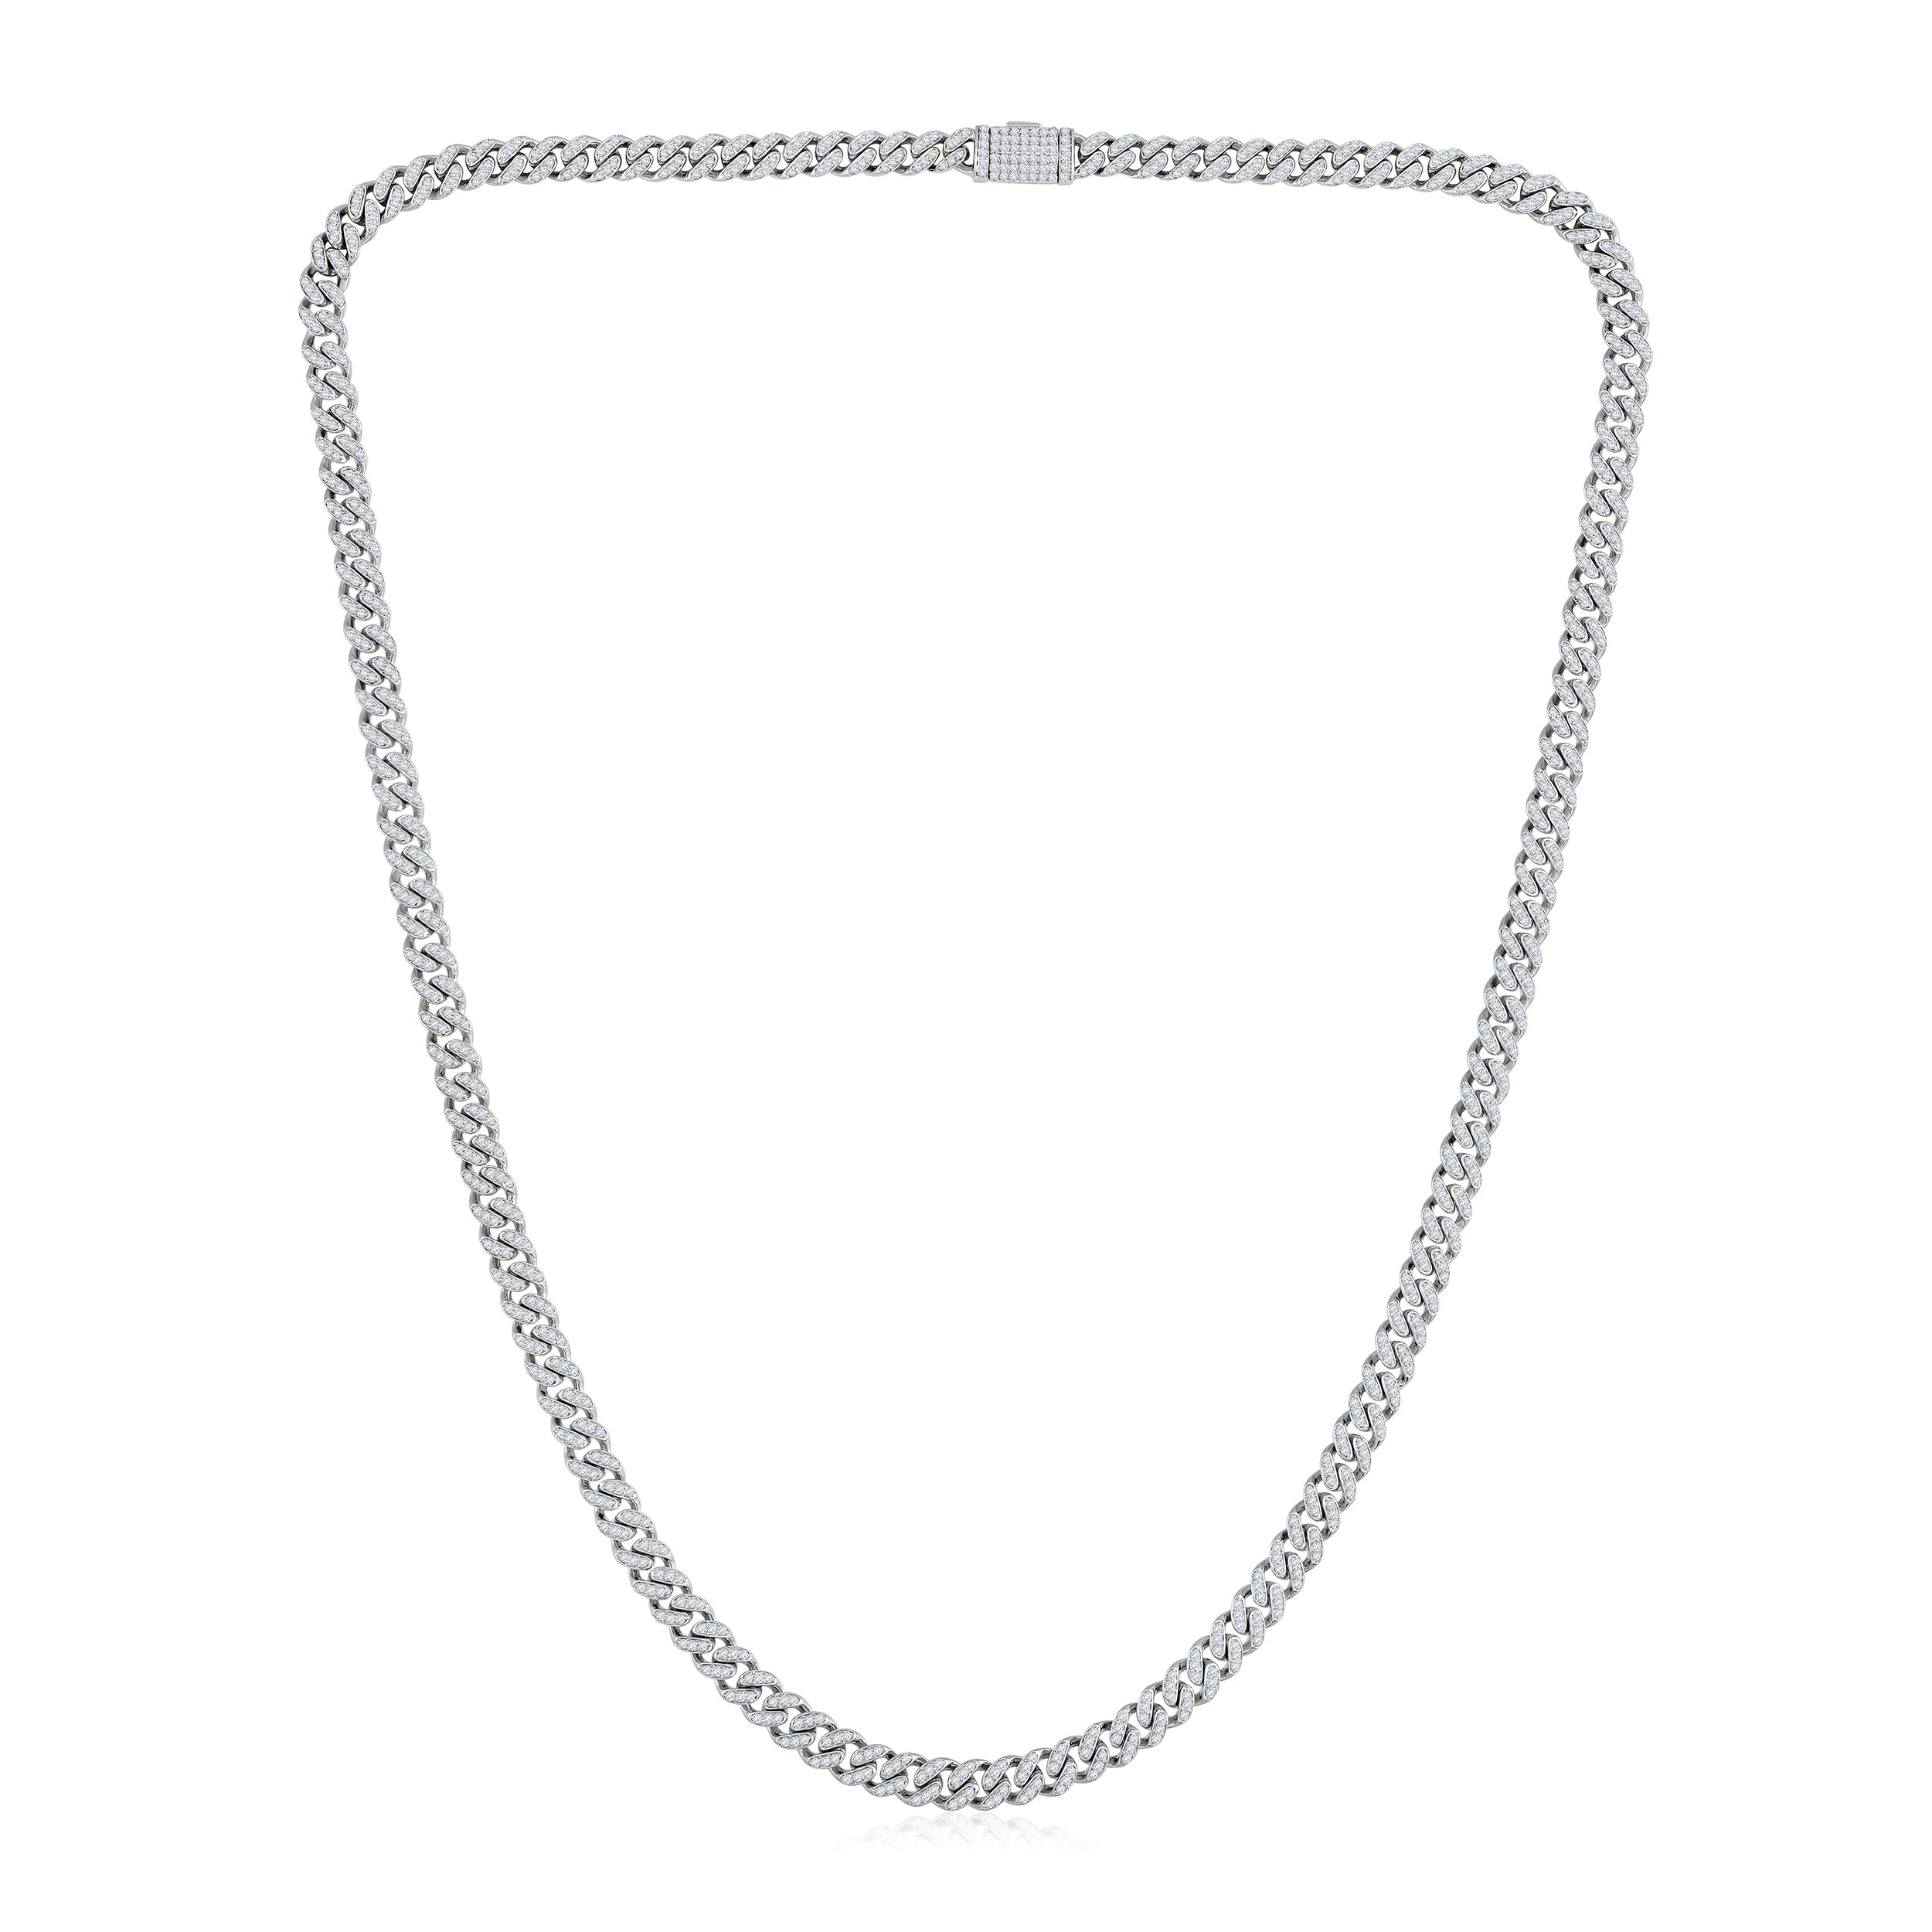 Certified 10K Gold 1.8ct Natural Diamond F-I1 4.2mm Cuban Chain Link White Necklace